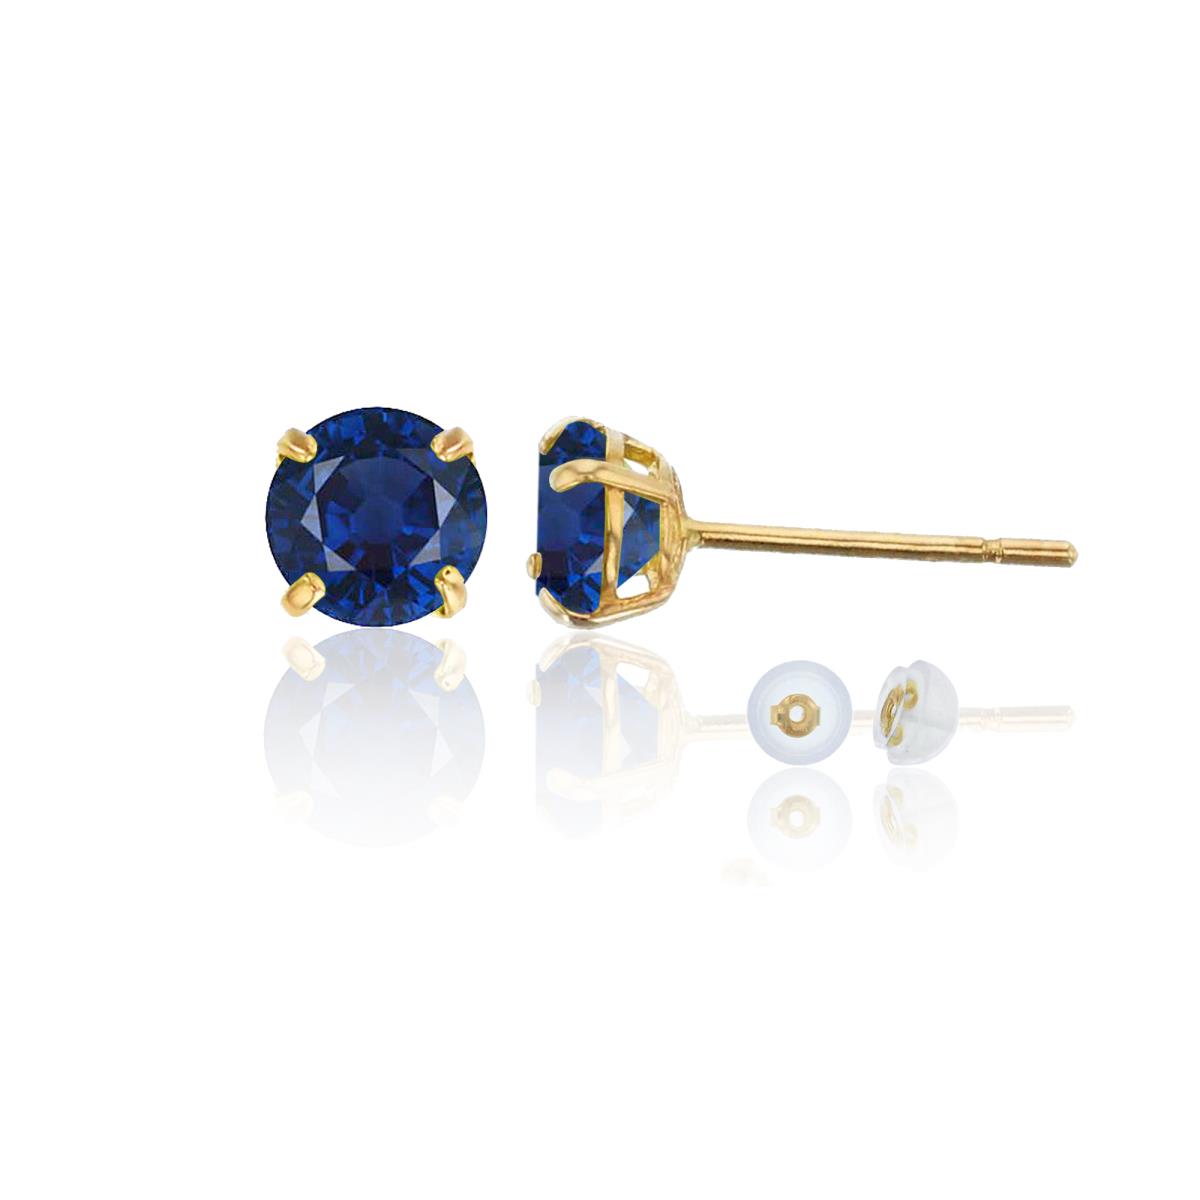 10K Yellow Gold 6.00mm Round Created Blue Sapphire Stud Earring